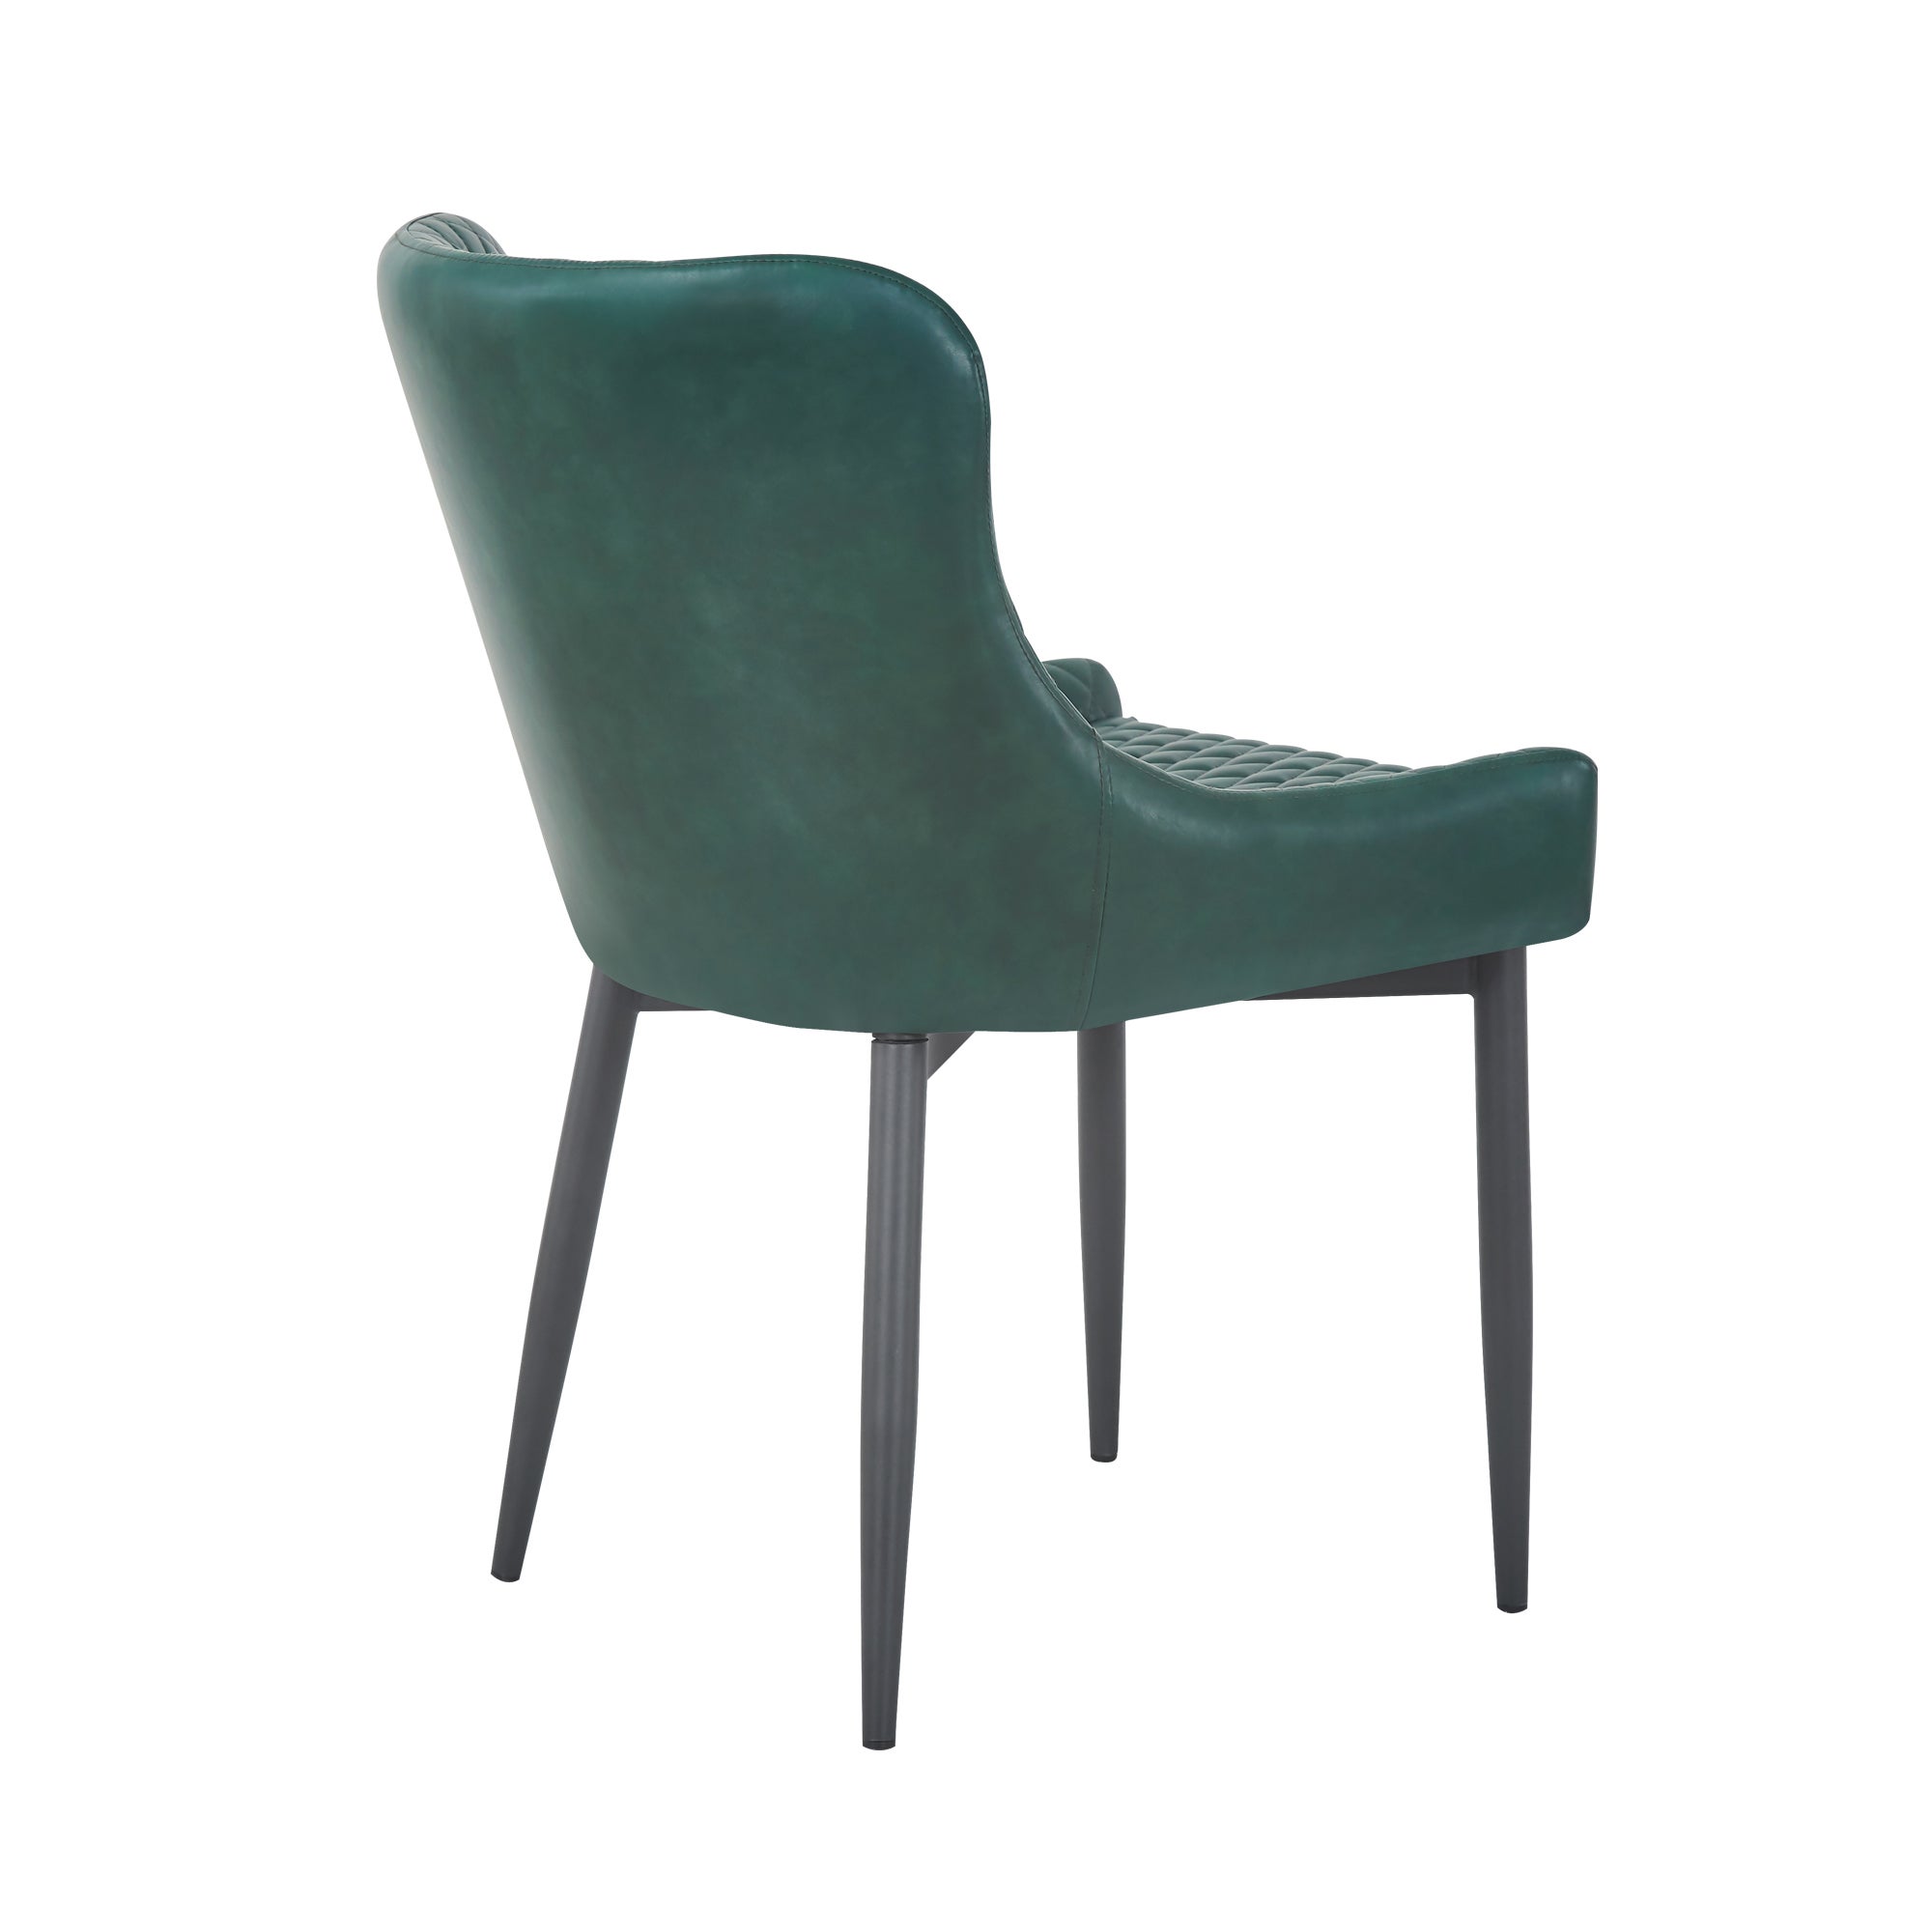 Montreal Set of 2 Dining Chairs Emerald Green PU Leather | Dunelm